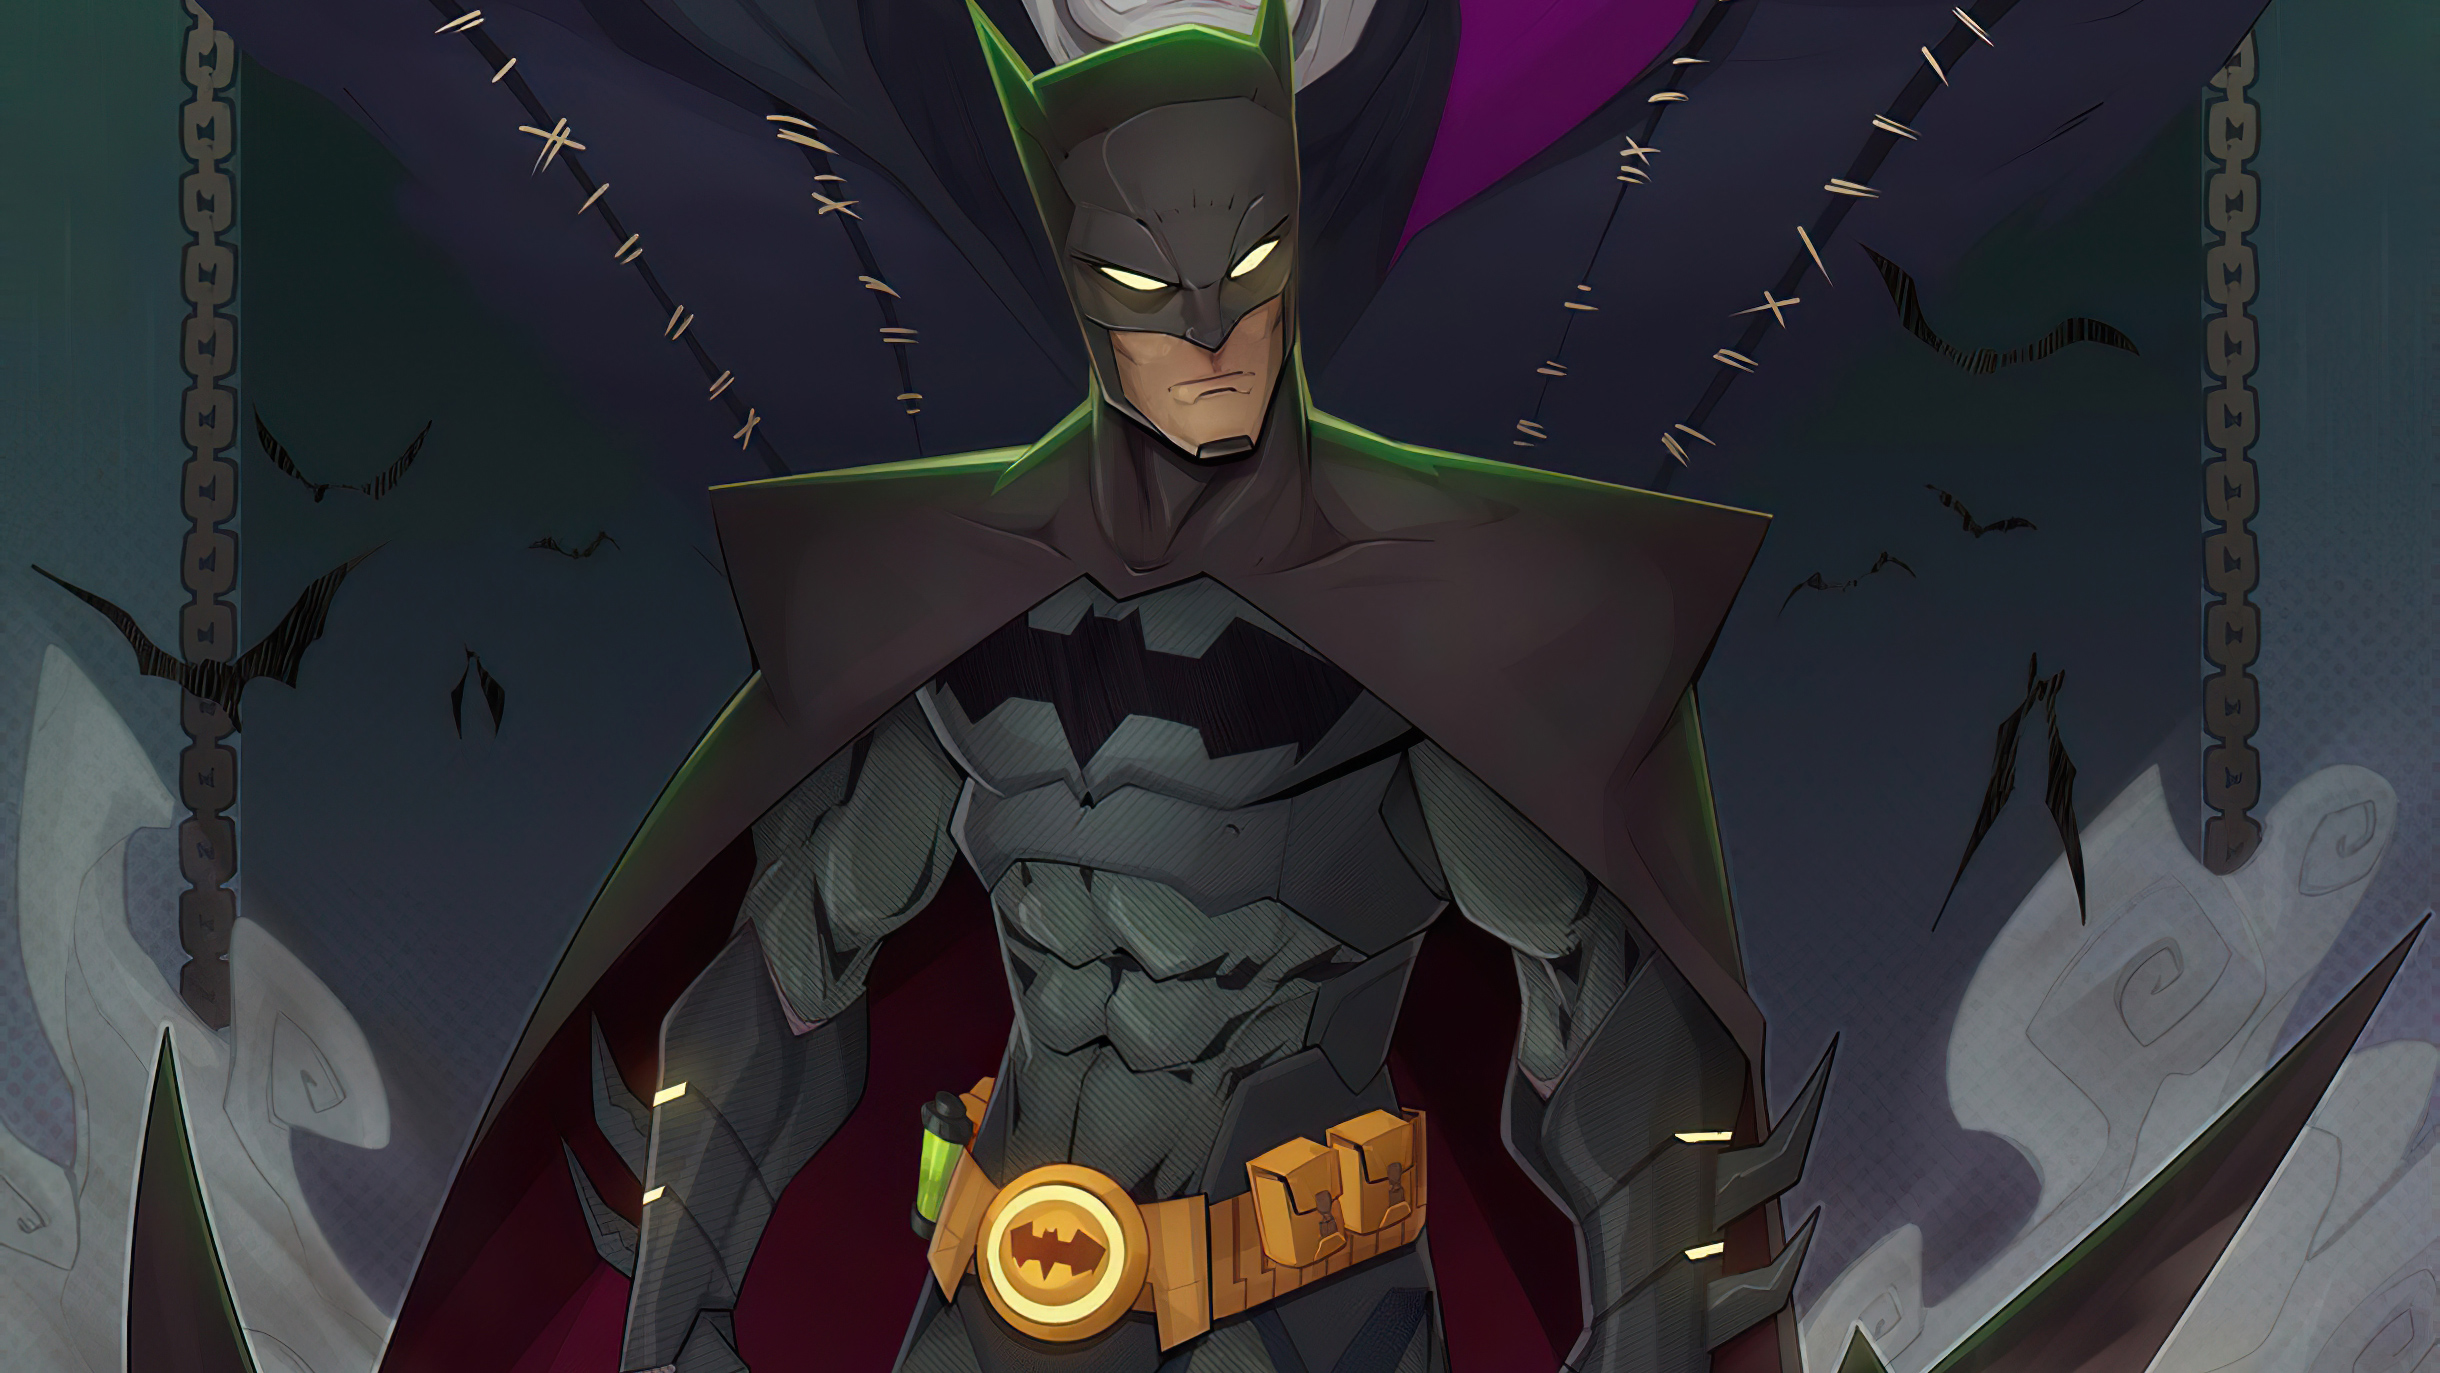 Batman With Black Cape And Gold Utility Belt 8998